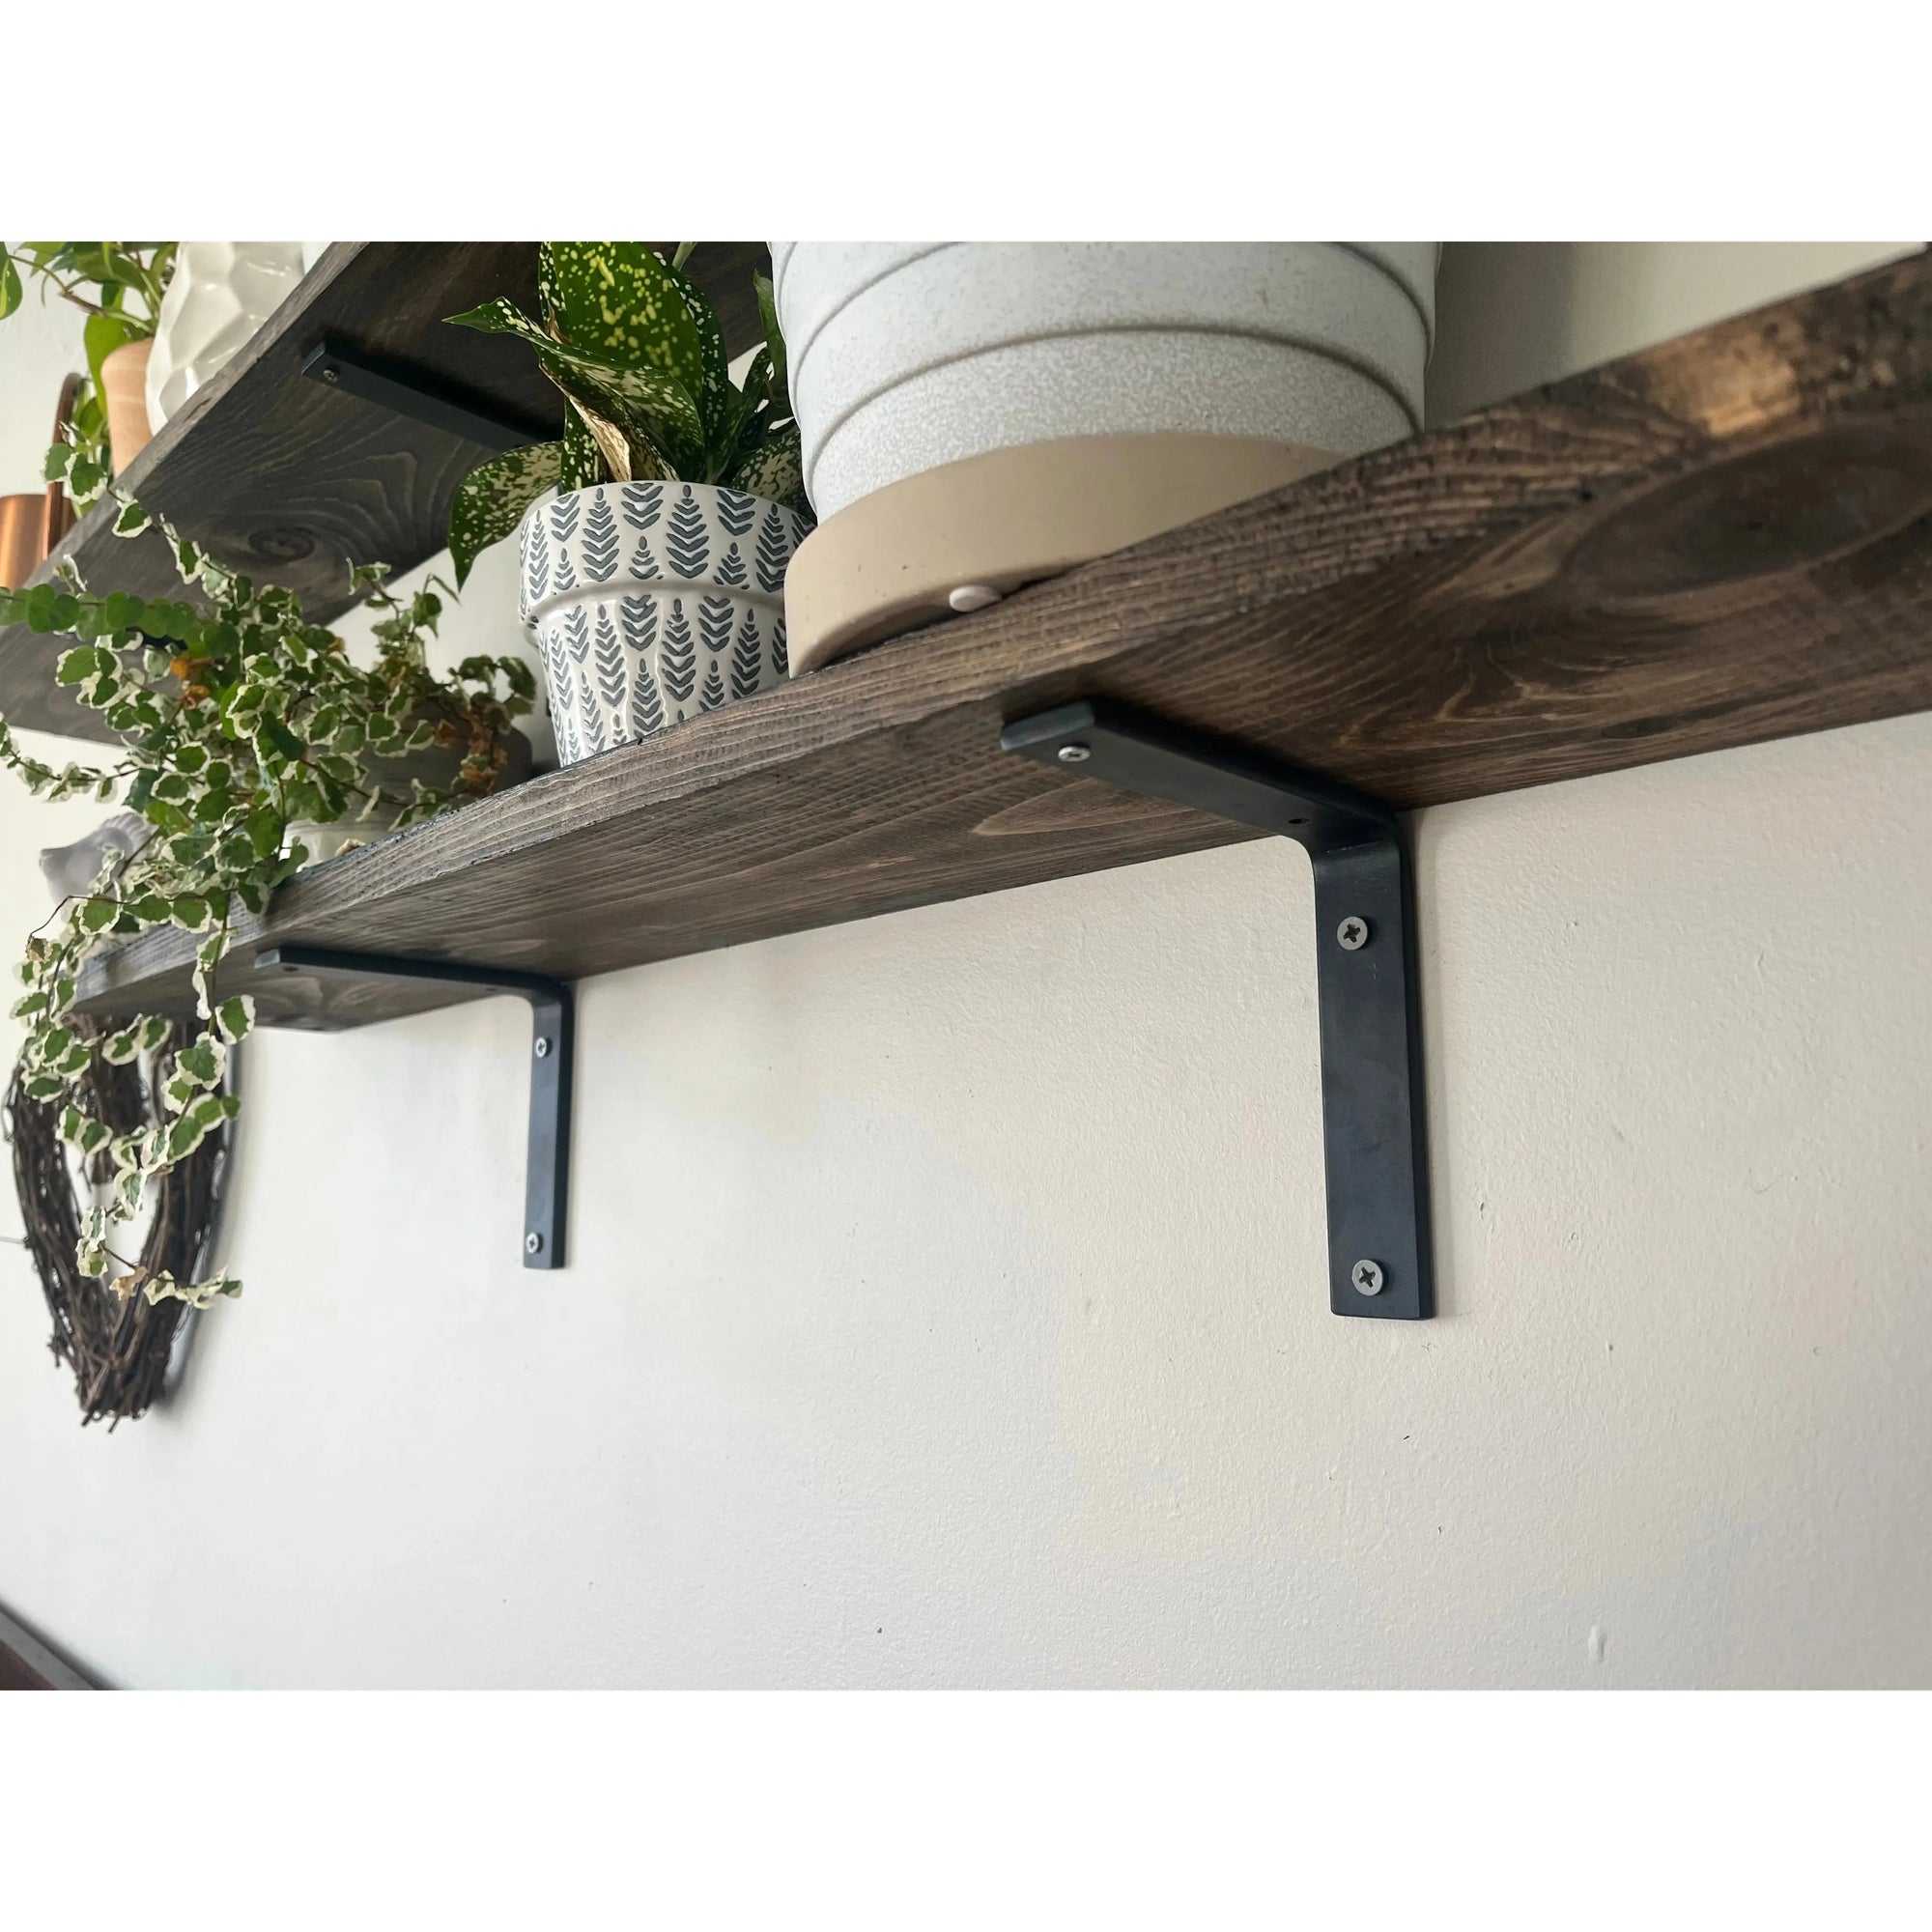 The Liverpool L Style Support Shelf Support 4" Depth x 4" Wall Mount Length Finish Raw - Uncoated Metal | Industrial Farm Co